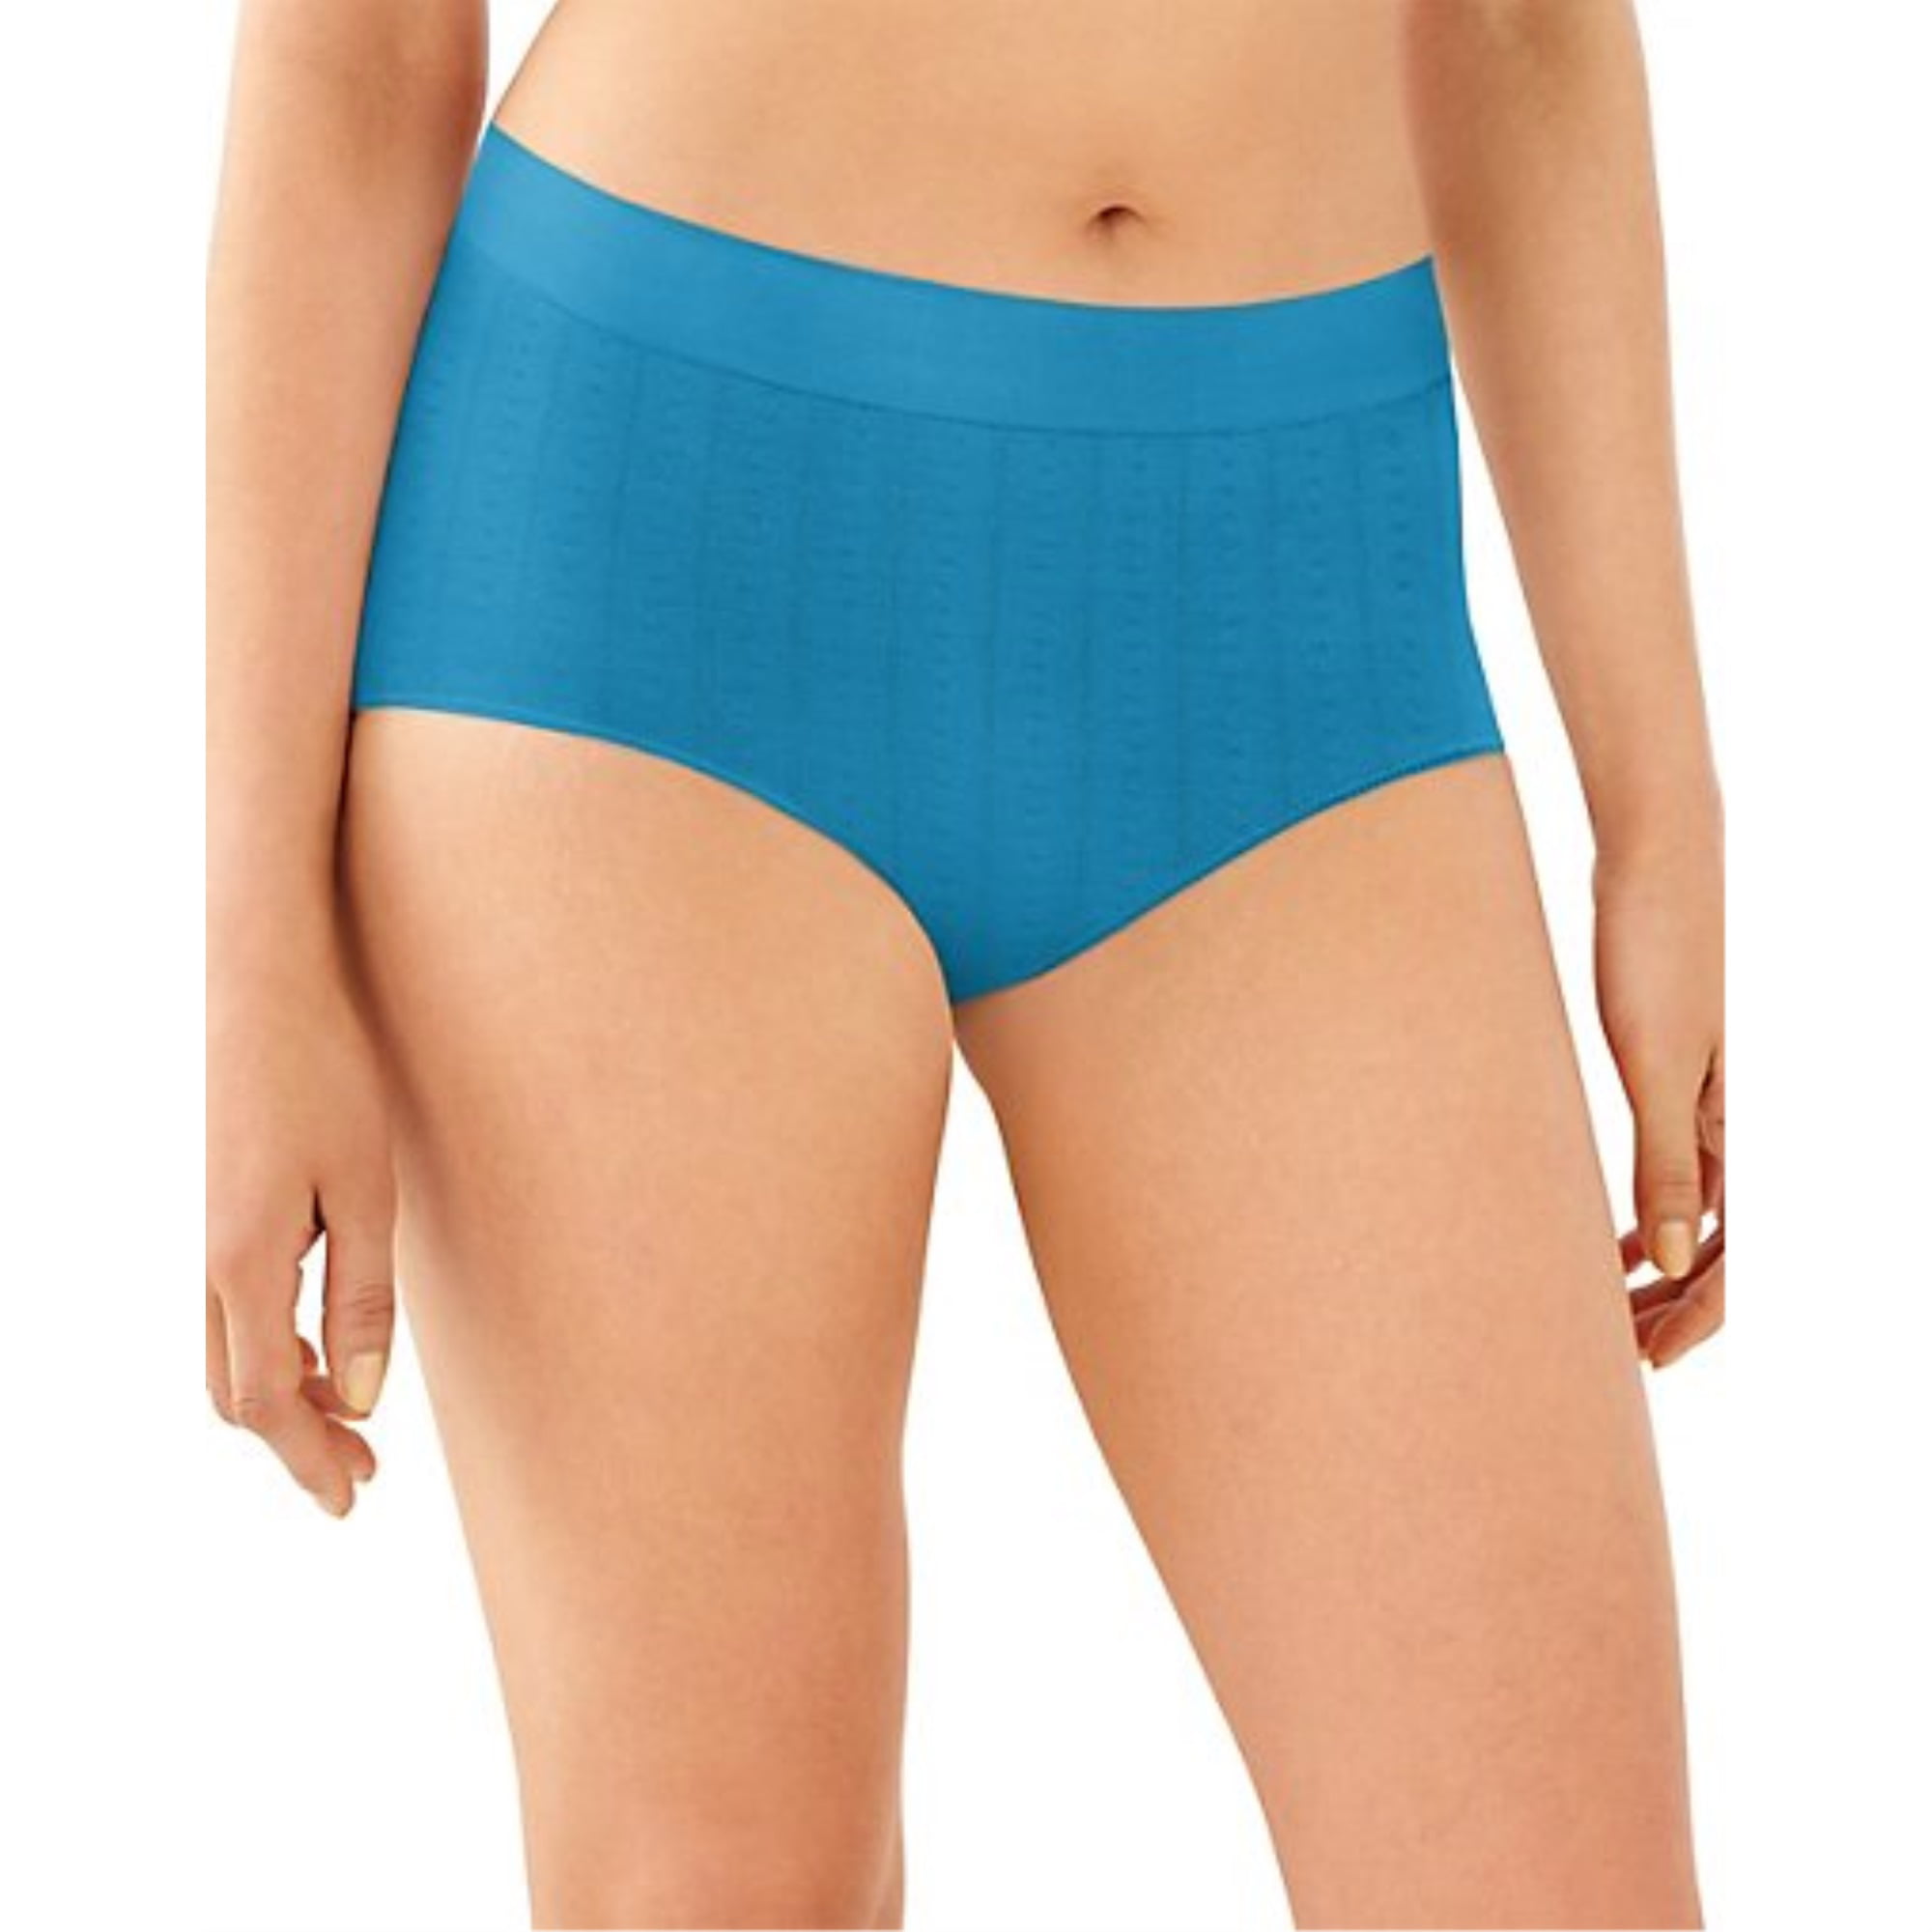 Details about   Bali Women's Smoothing Brief